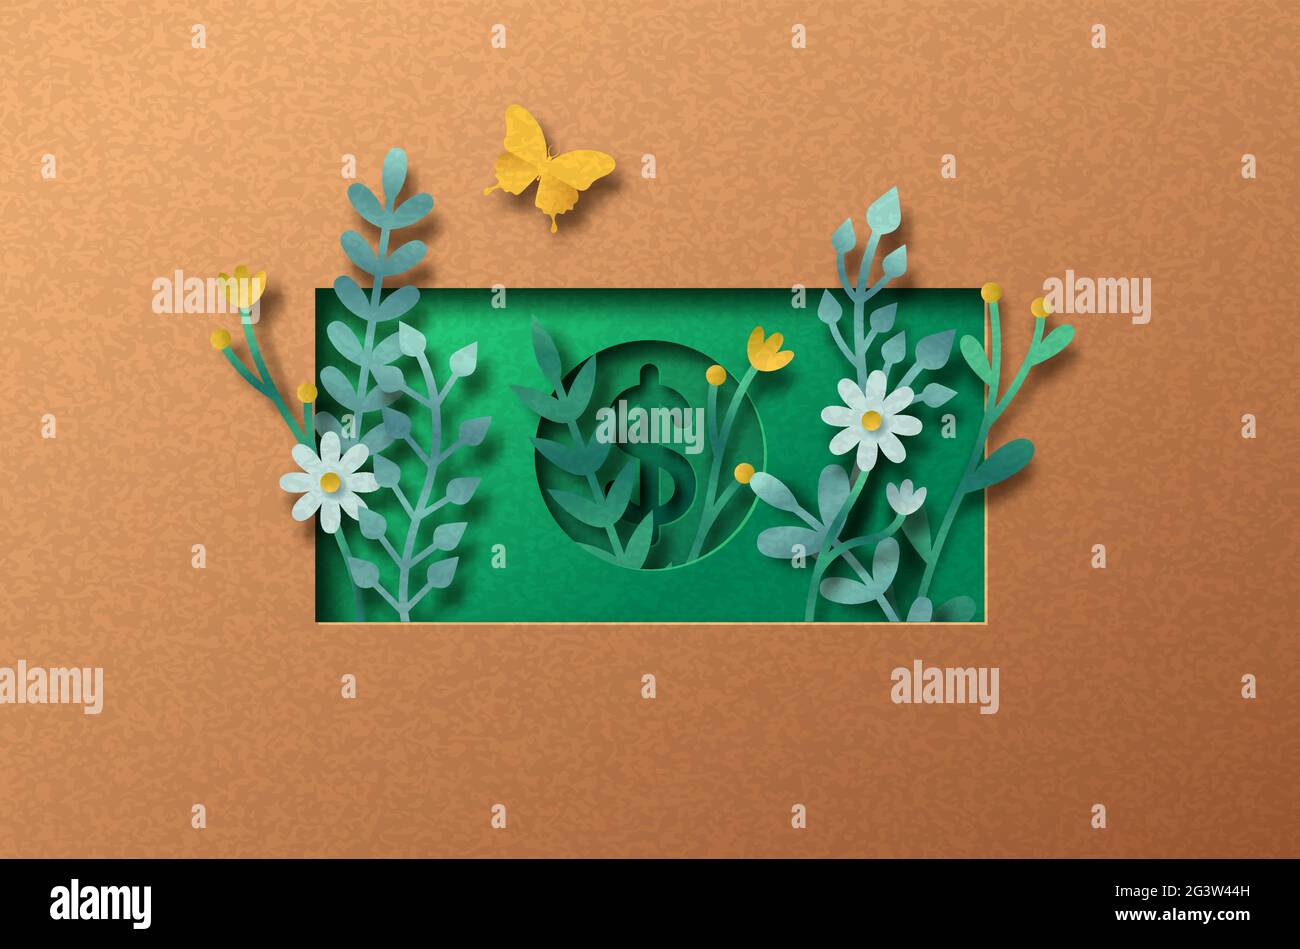 Sustainable economy papercut illustration with plant leaf and flower inside dollar. Eco-friendly business symbol, circular finance concept. 3D cutout Stock Vector